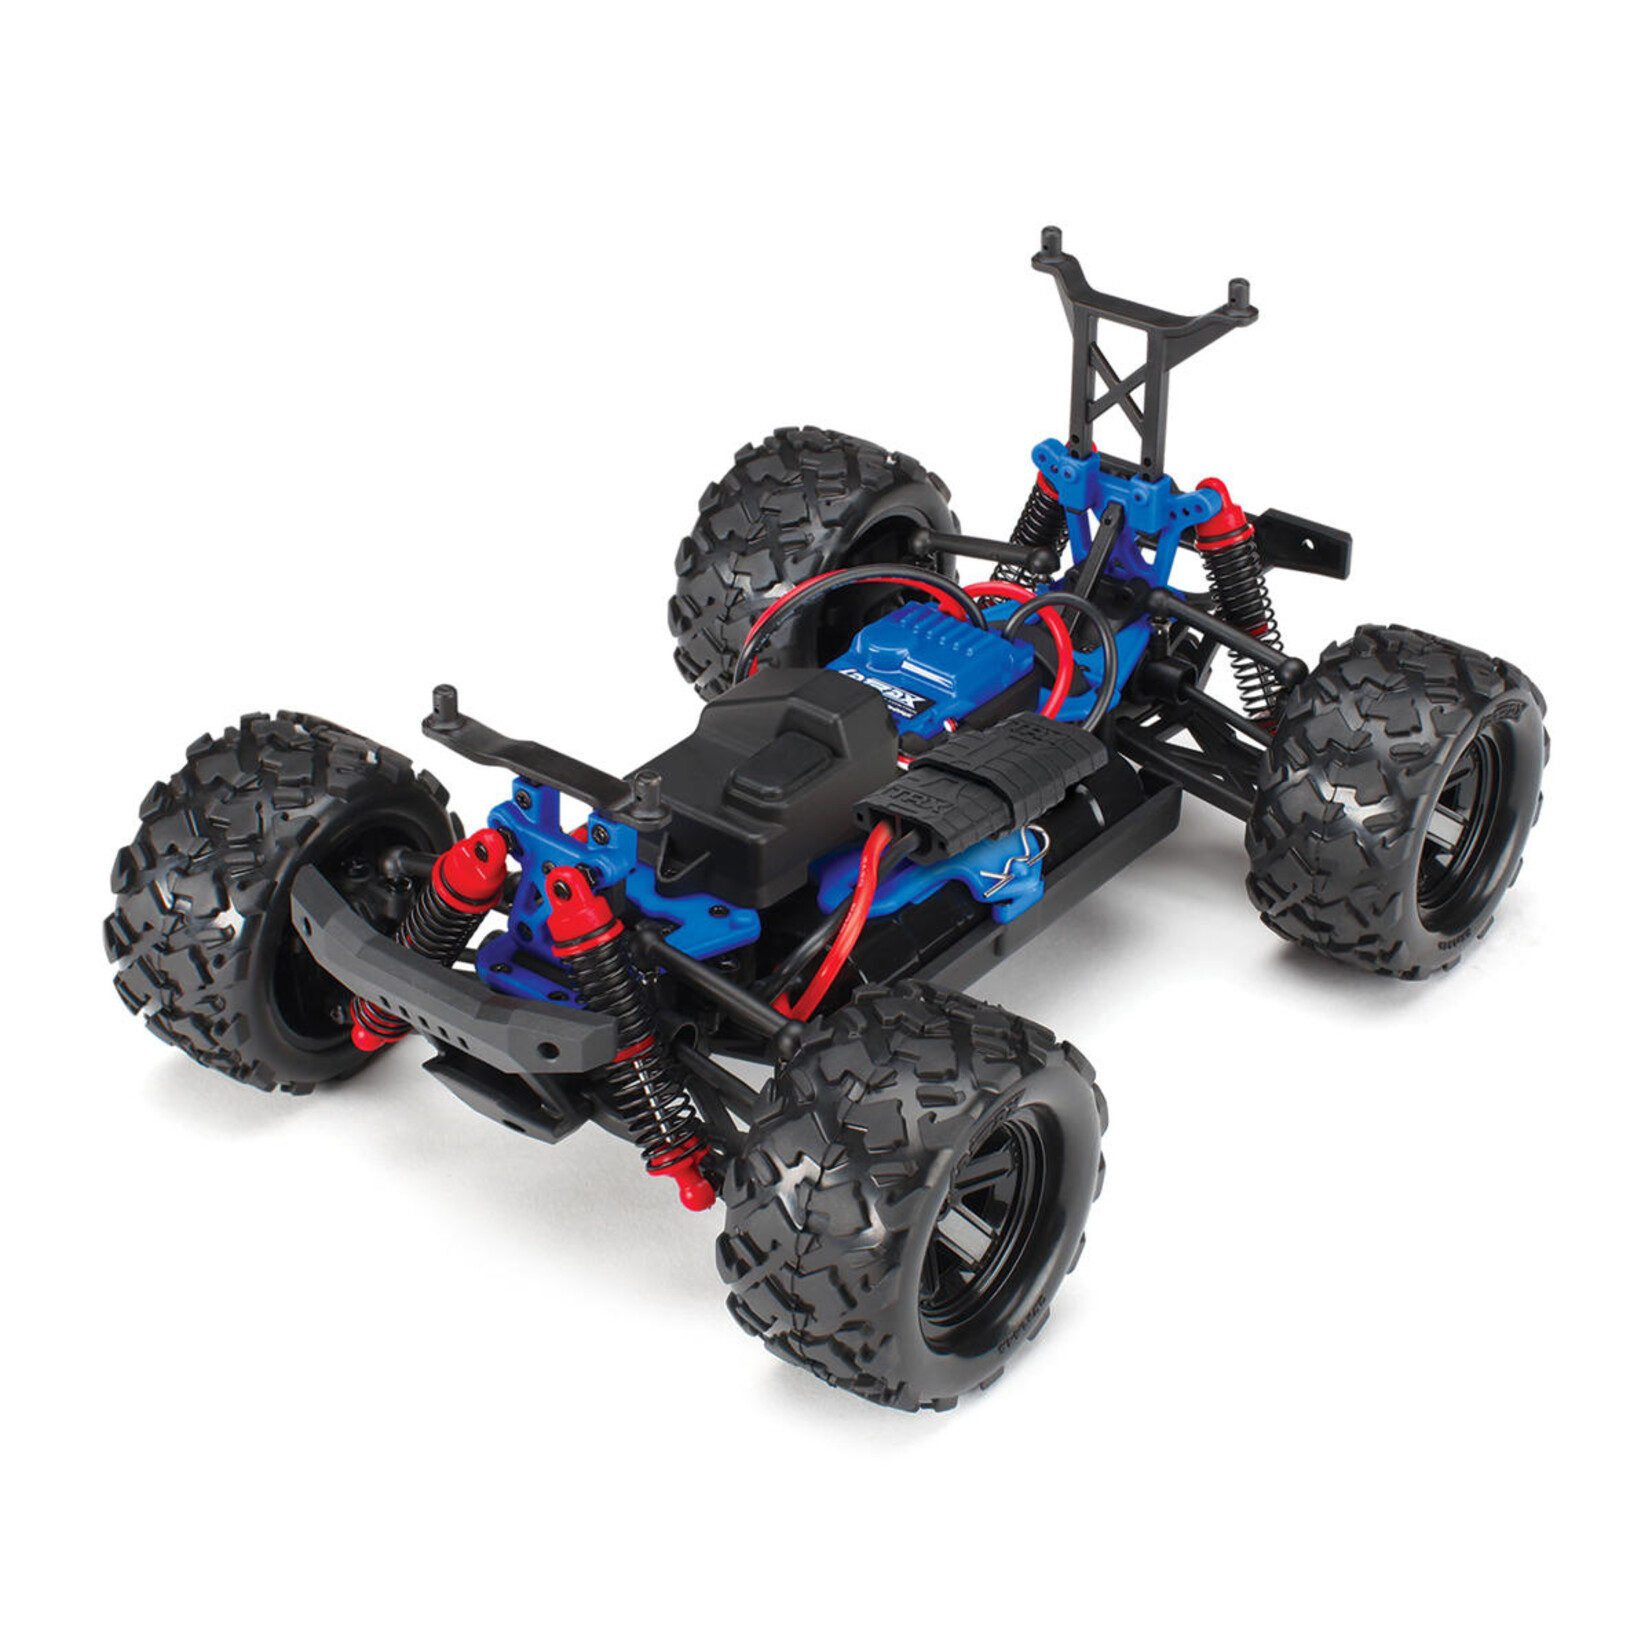 Traxxas Traxxas LaTrax Teton 1/18 4WD RTR Monster Truck (Red) w/2.4GHz Radio, Battery & AC Charger #76054-5-REDX